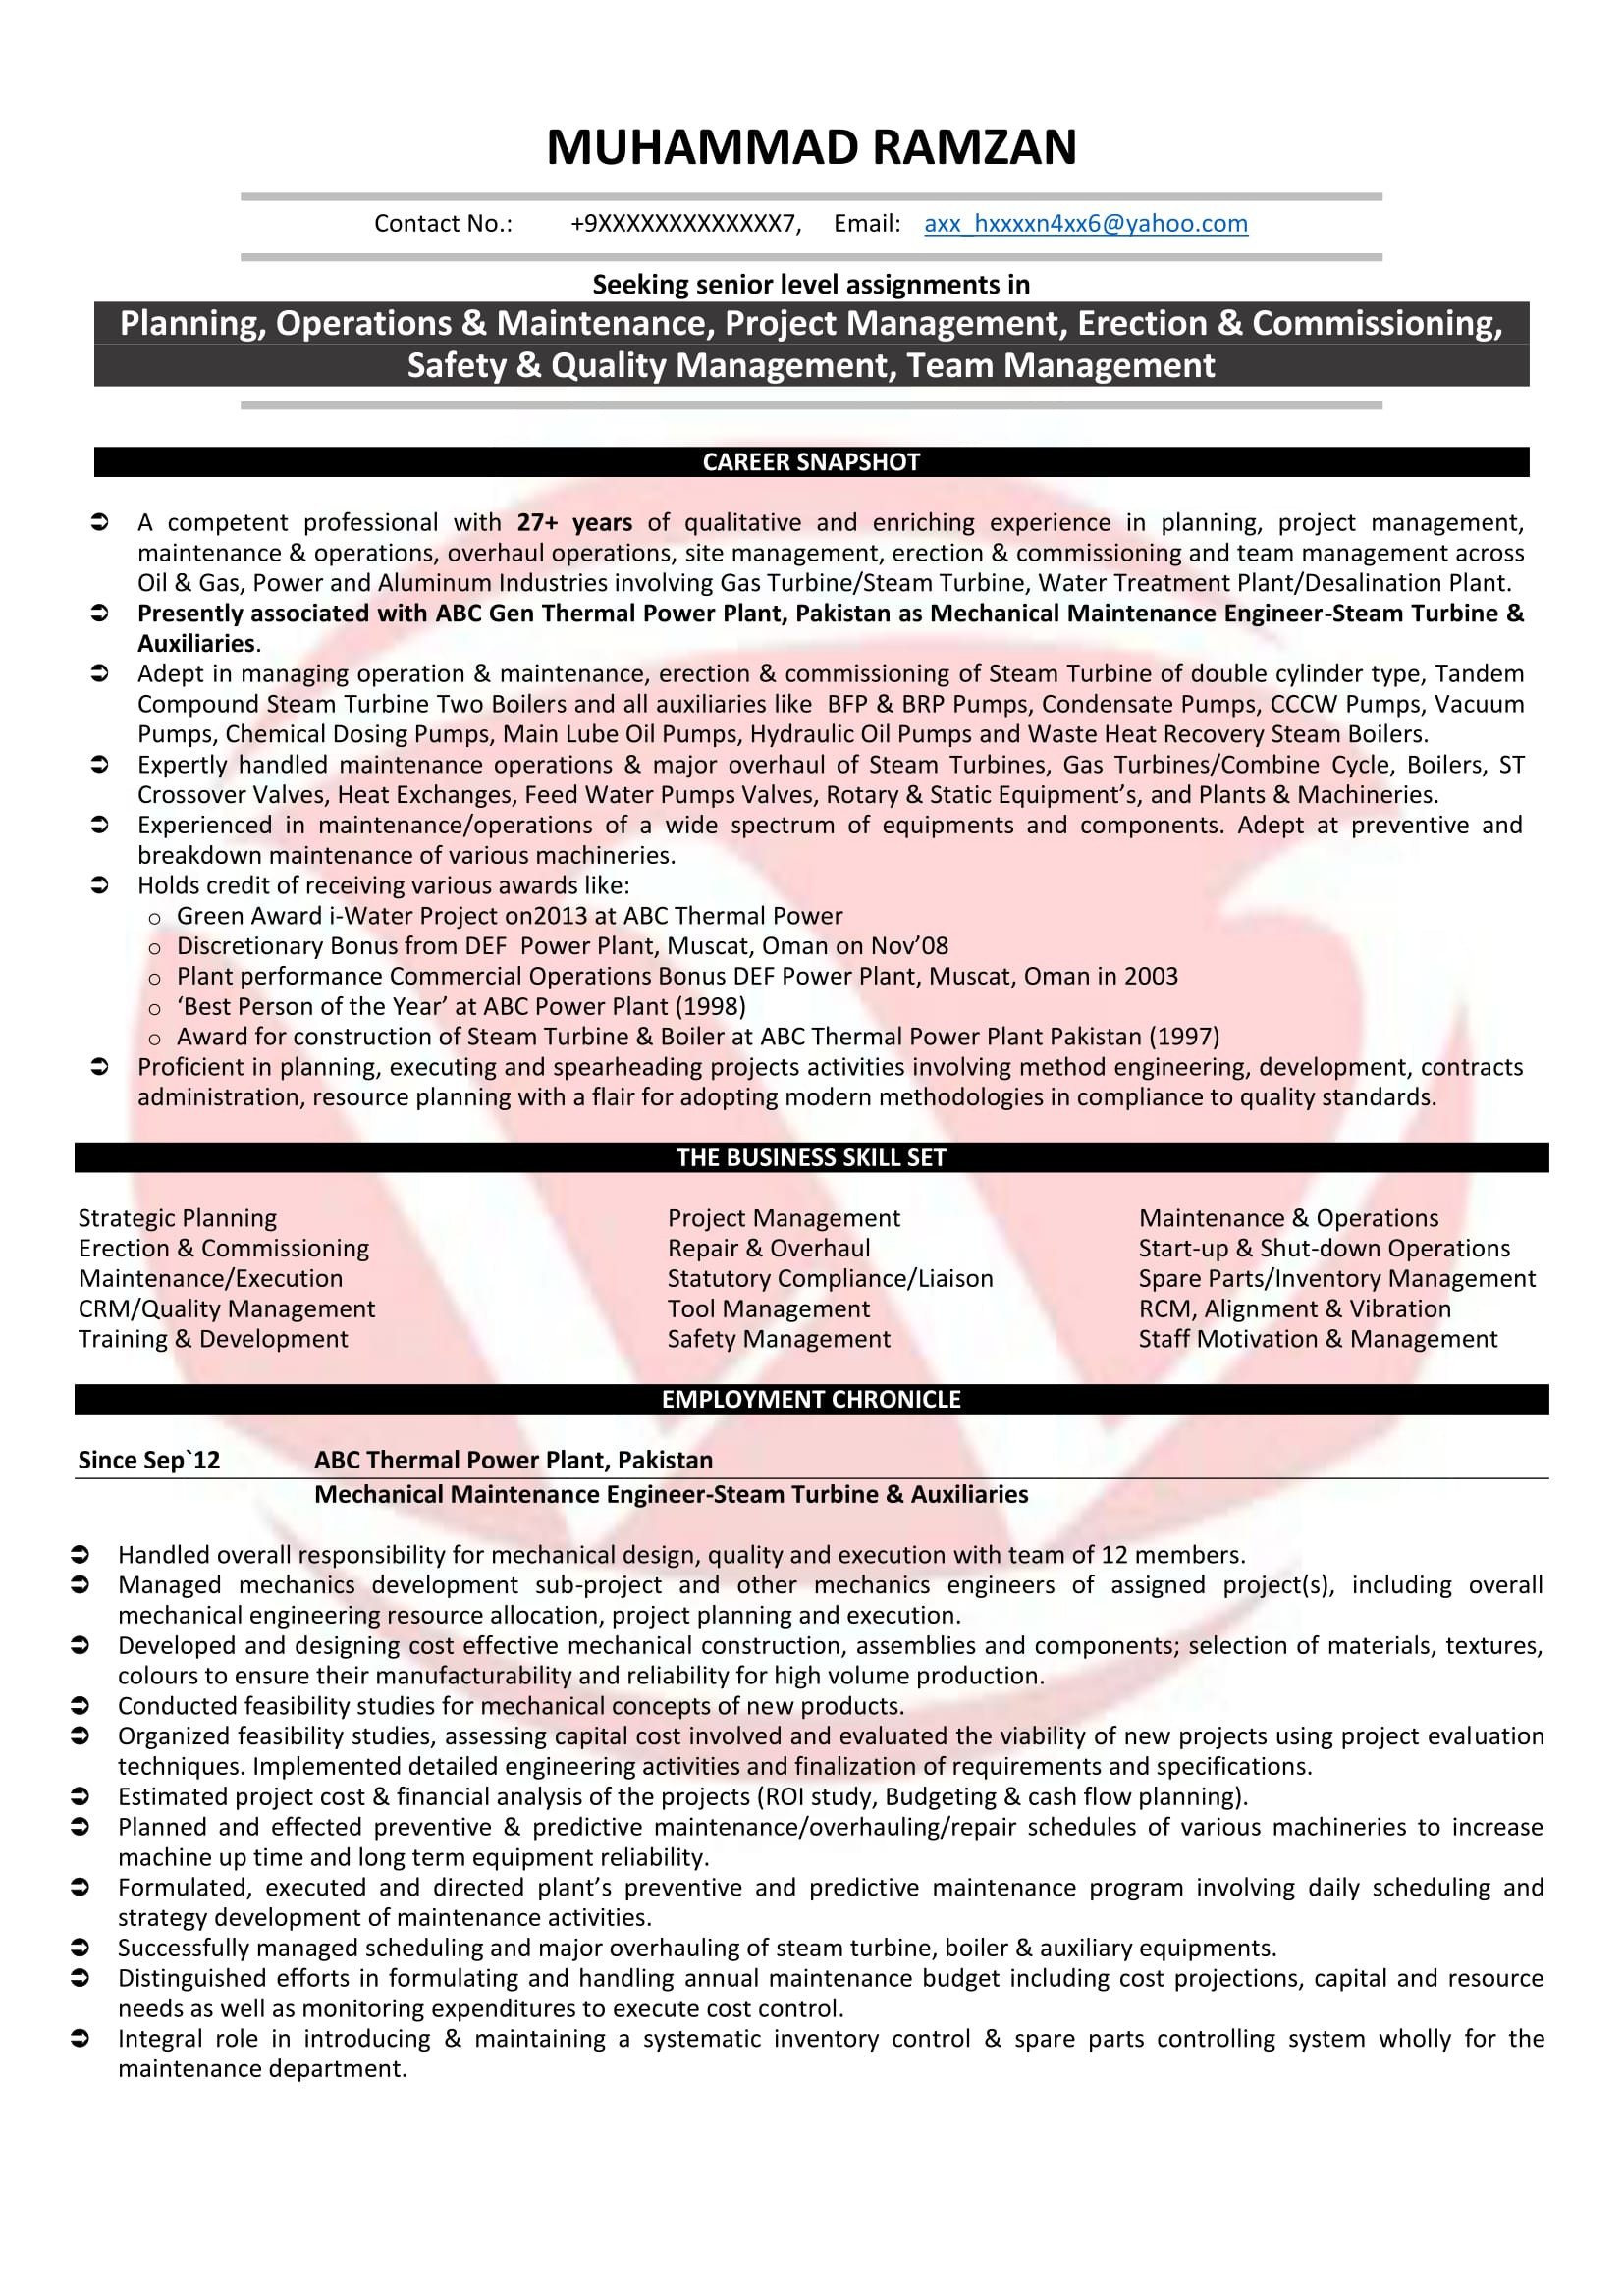 Thermal Power Plant Electrical Engineer Resume Sample Mechanical Engineer Sample Resumes, Download Resume format Templates!